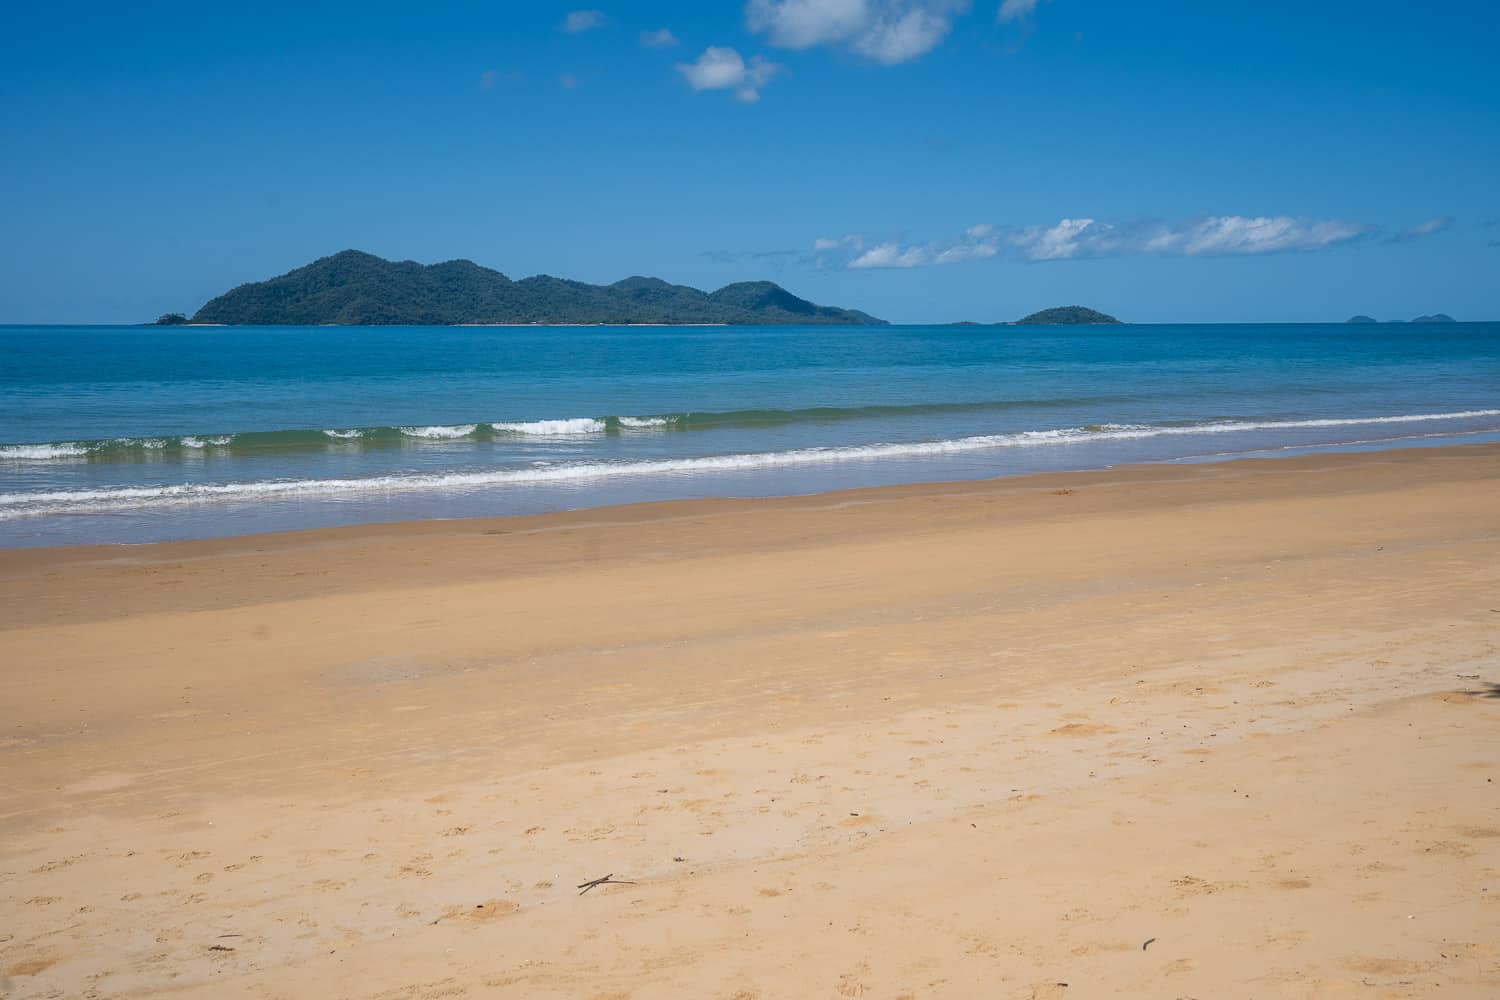 View of Dunk Island from Mission Beach, North Queensland, Australia